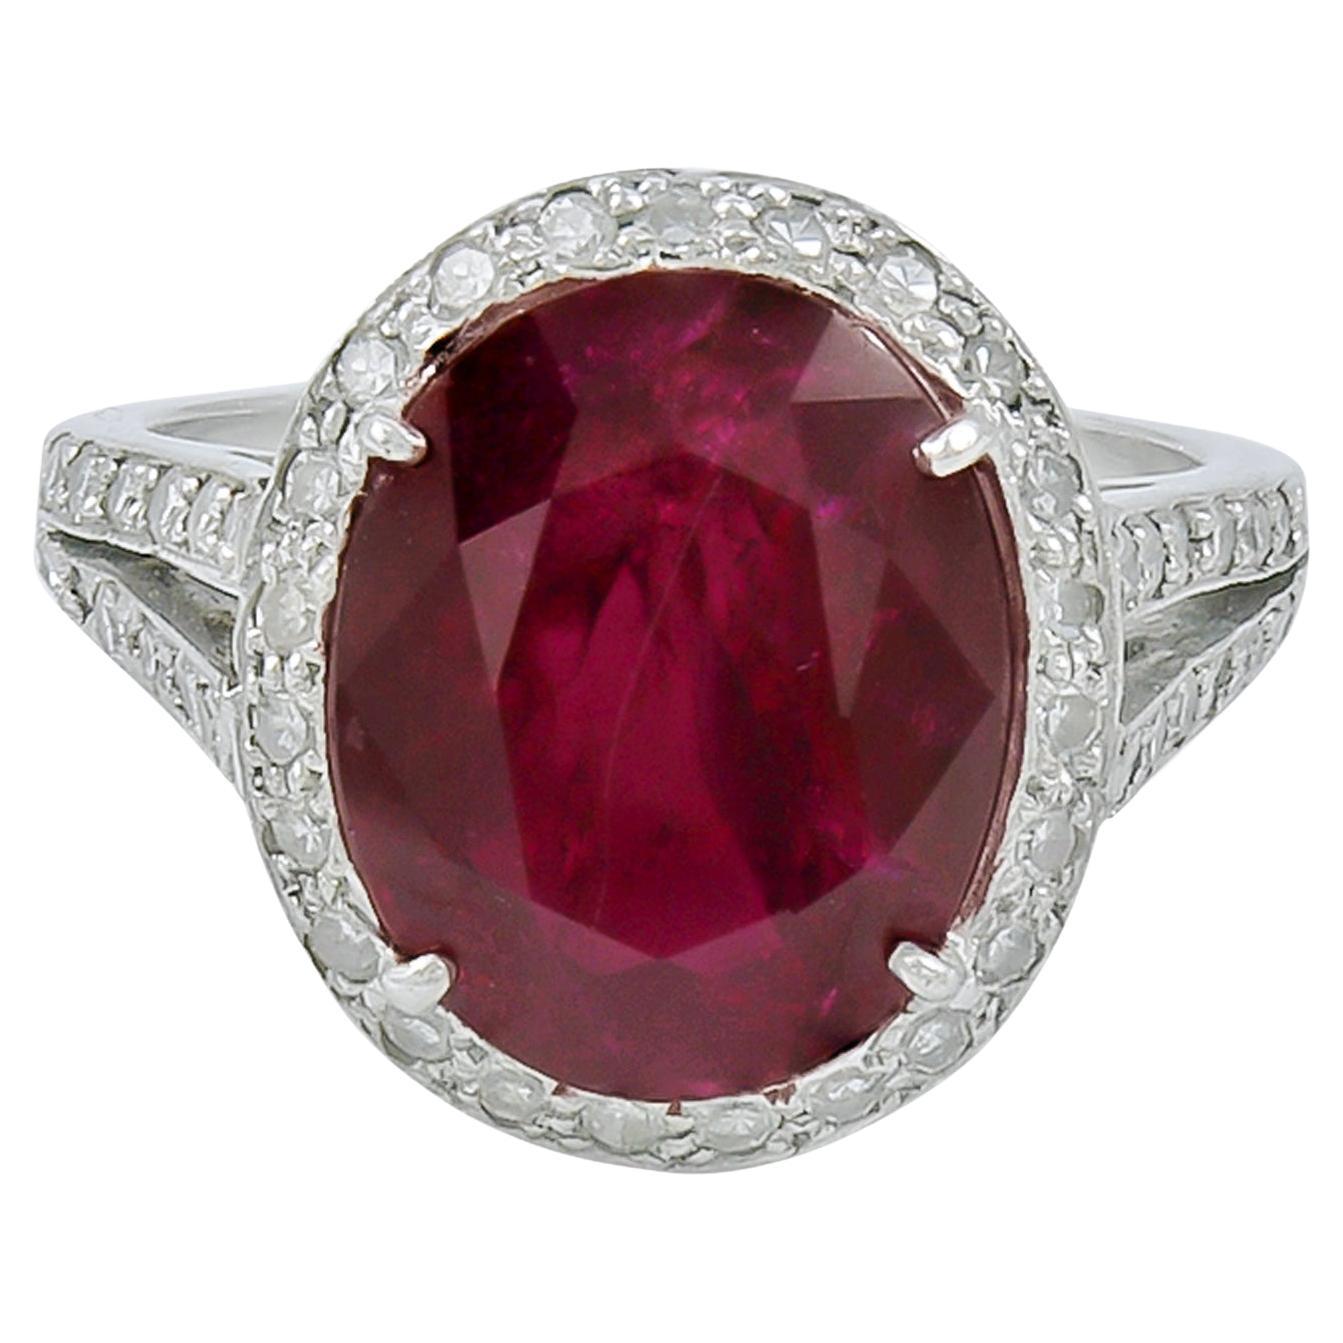 Spectra Fine Jewelry Certified 6.16 Carat Unheated Ruby Diamond Ring For Sale